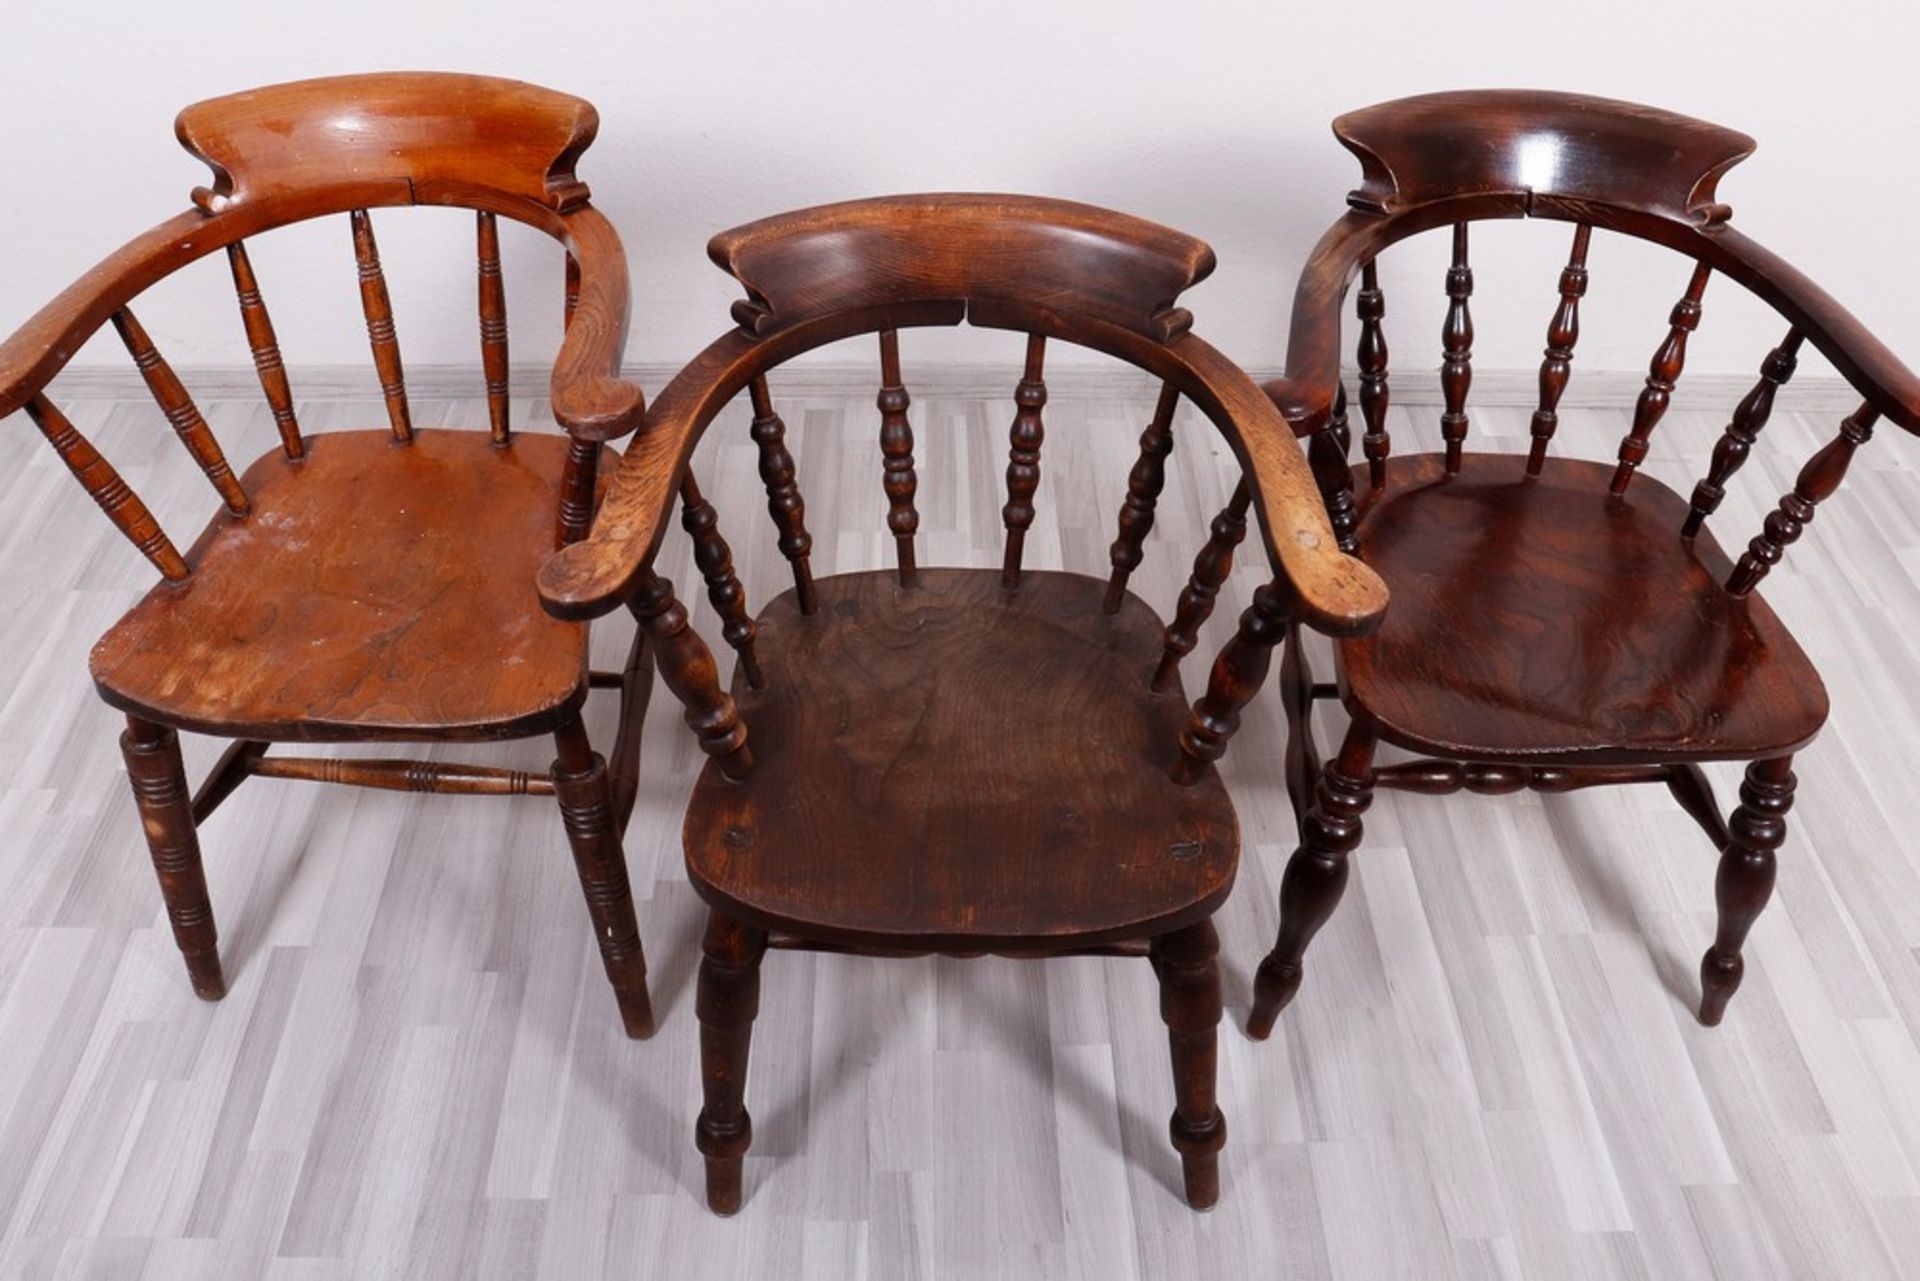 5 Smokers Chairs, England, 19th/20th C. - Image 4 of 4